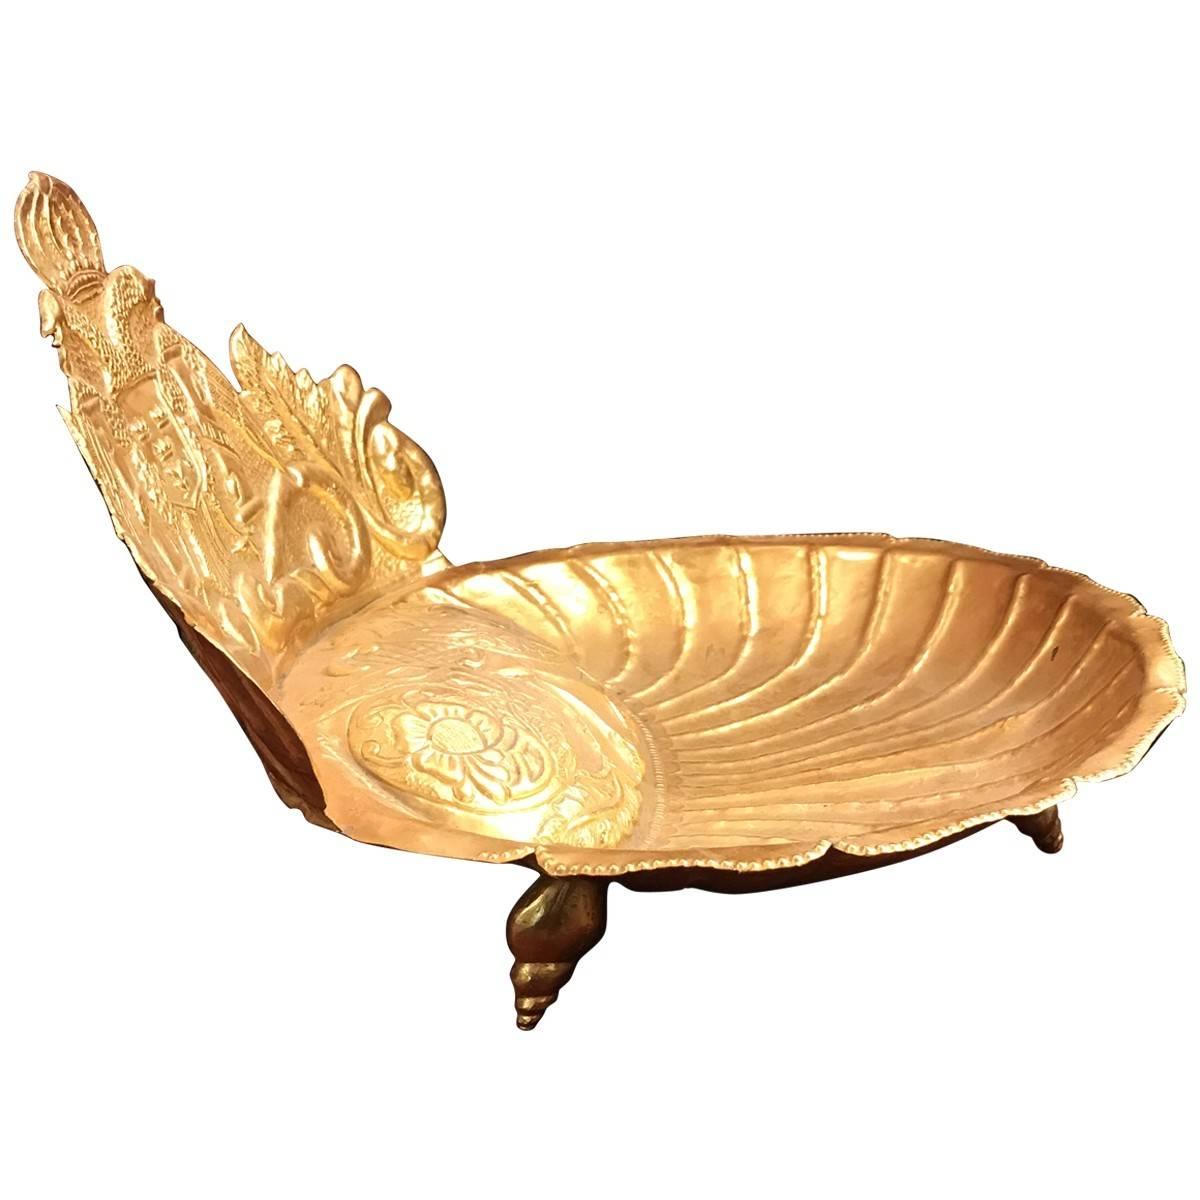 Gleaming from its gilded surface, this vintage dish is ornately decorated with a shell design and detailed armorial with a double-headed eagle and shield. Delicately supported by shell feet, this piece adds a luxurious touch.